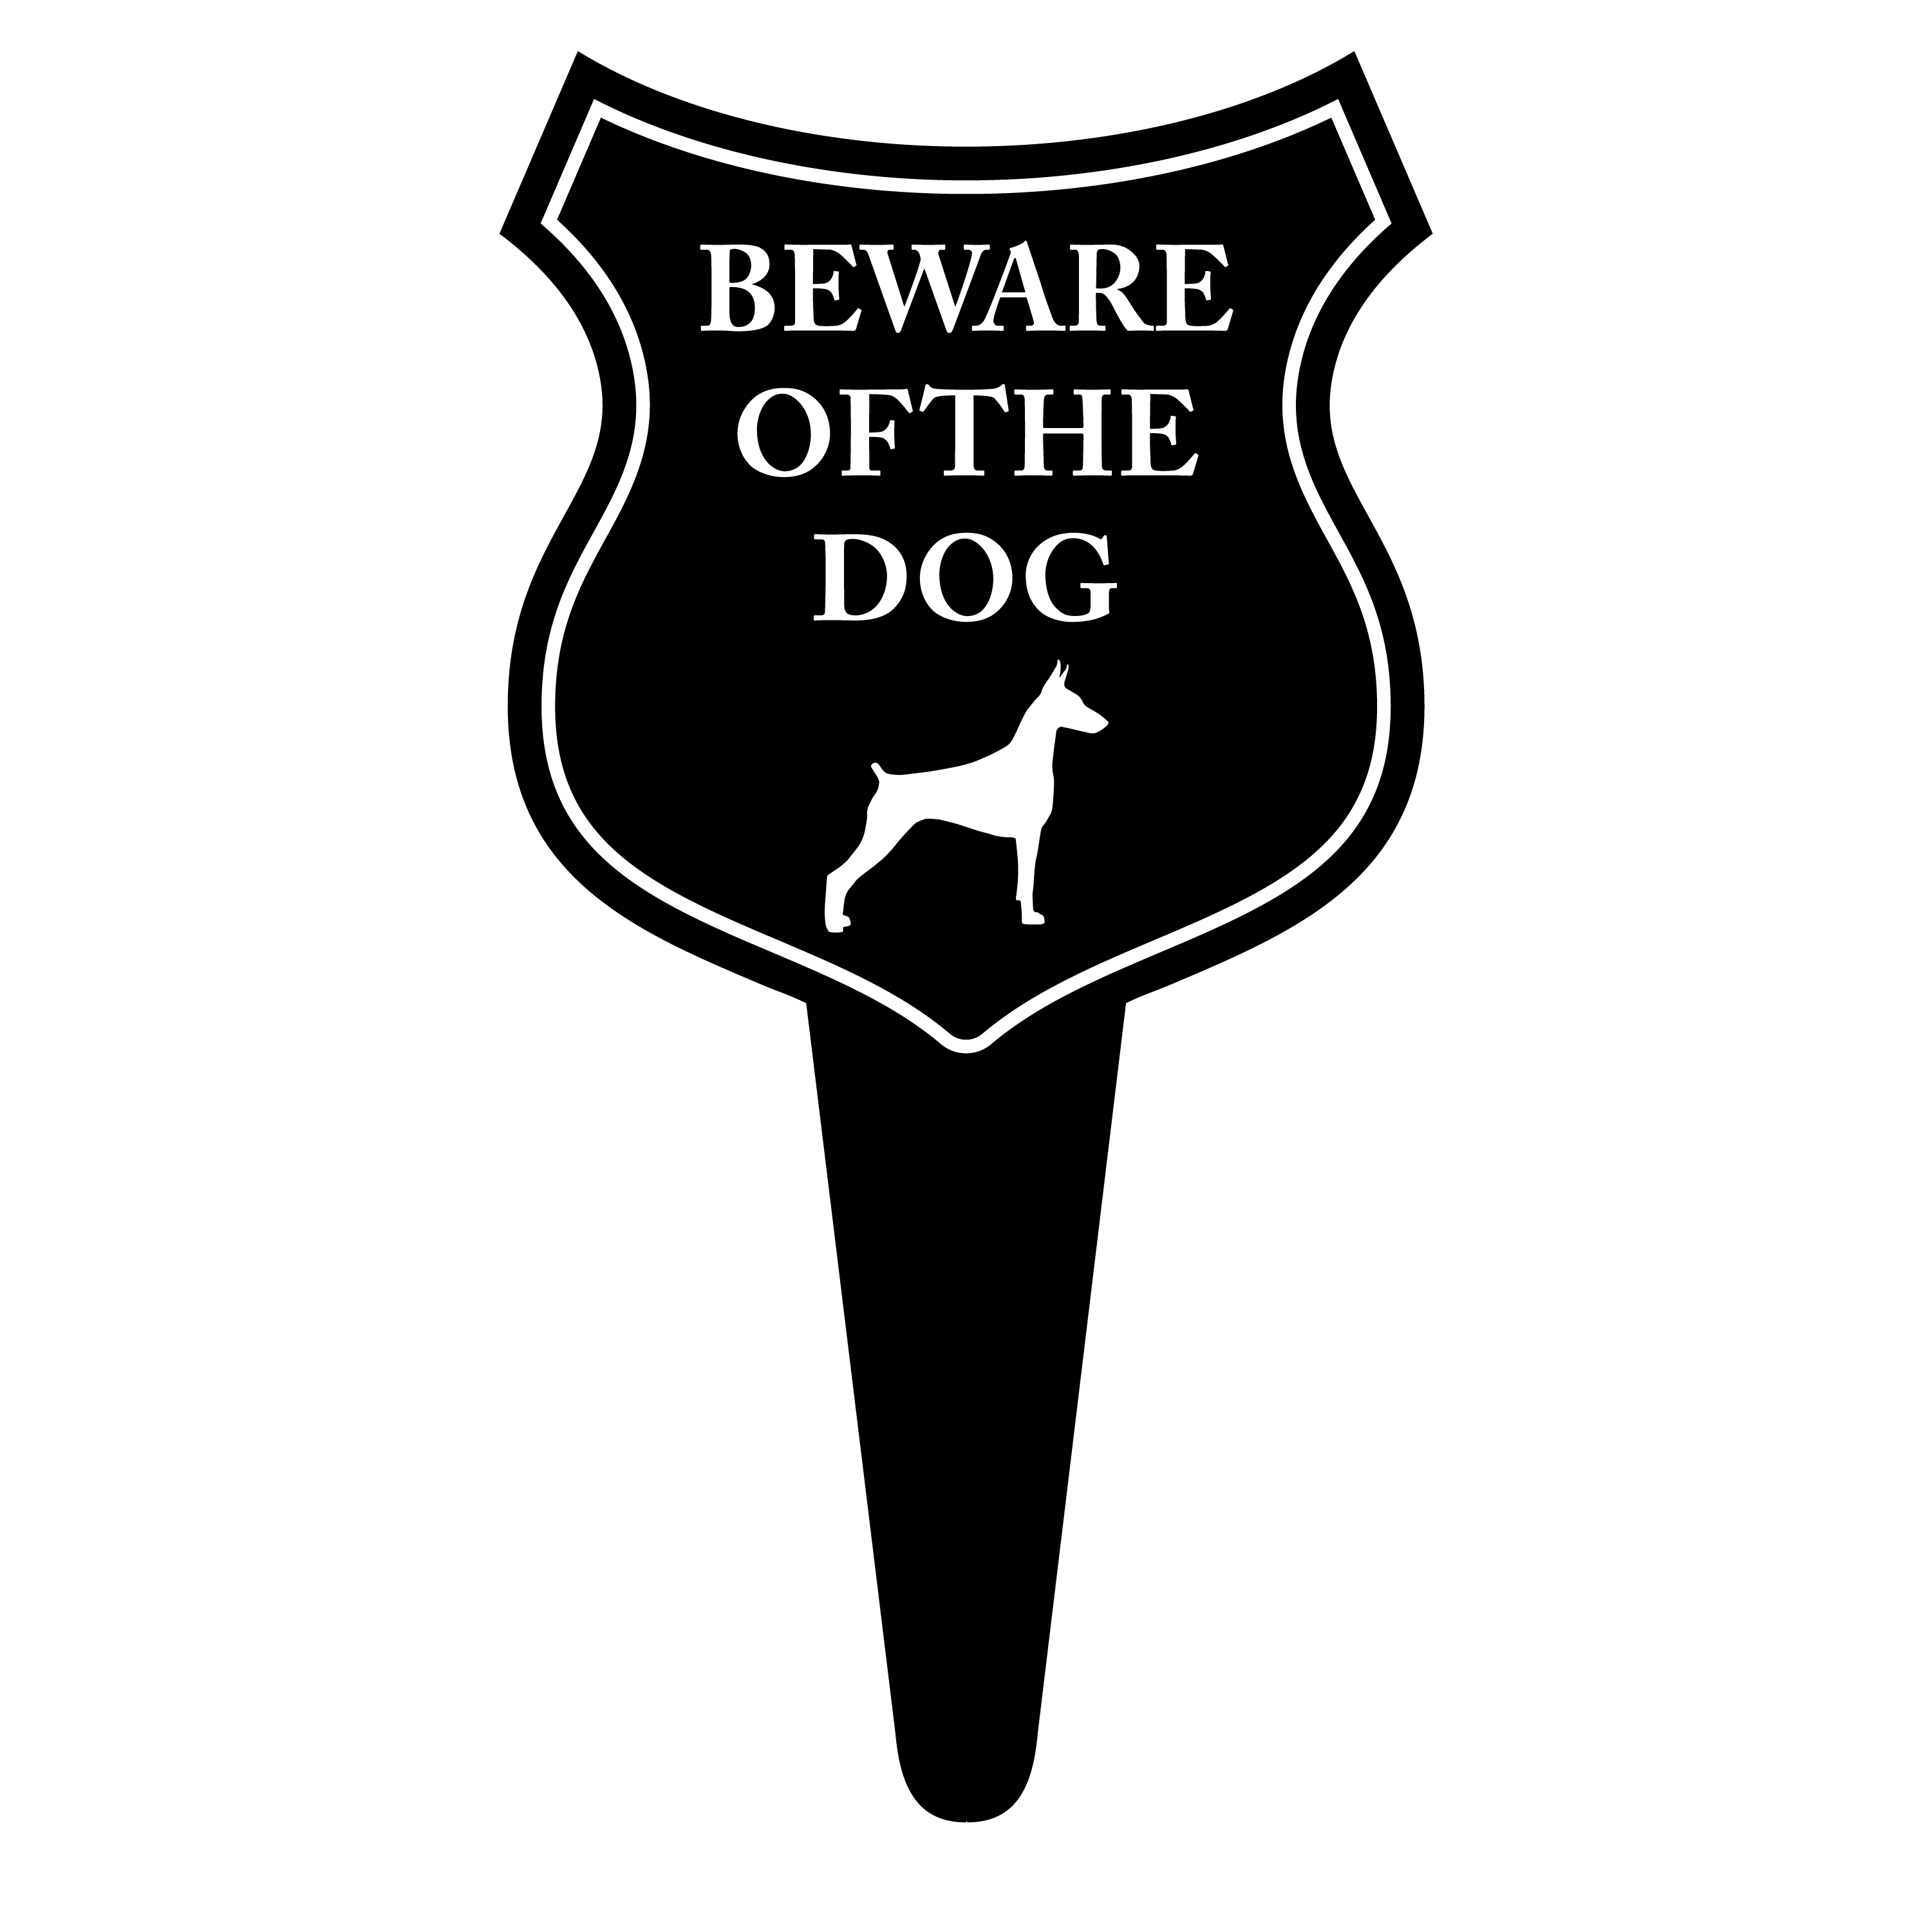 Goutoports Yard Metal Sign Closed Dogs in Yard Warning Beware of The Dog Garden Signs Outdoor Warning7.9x11.8 Inch